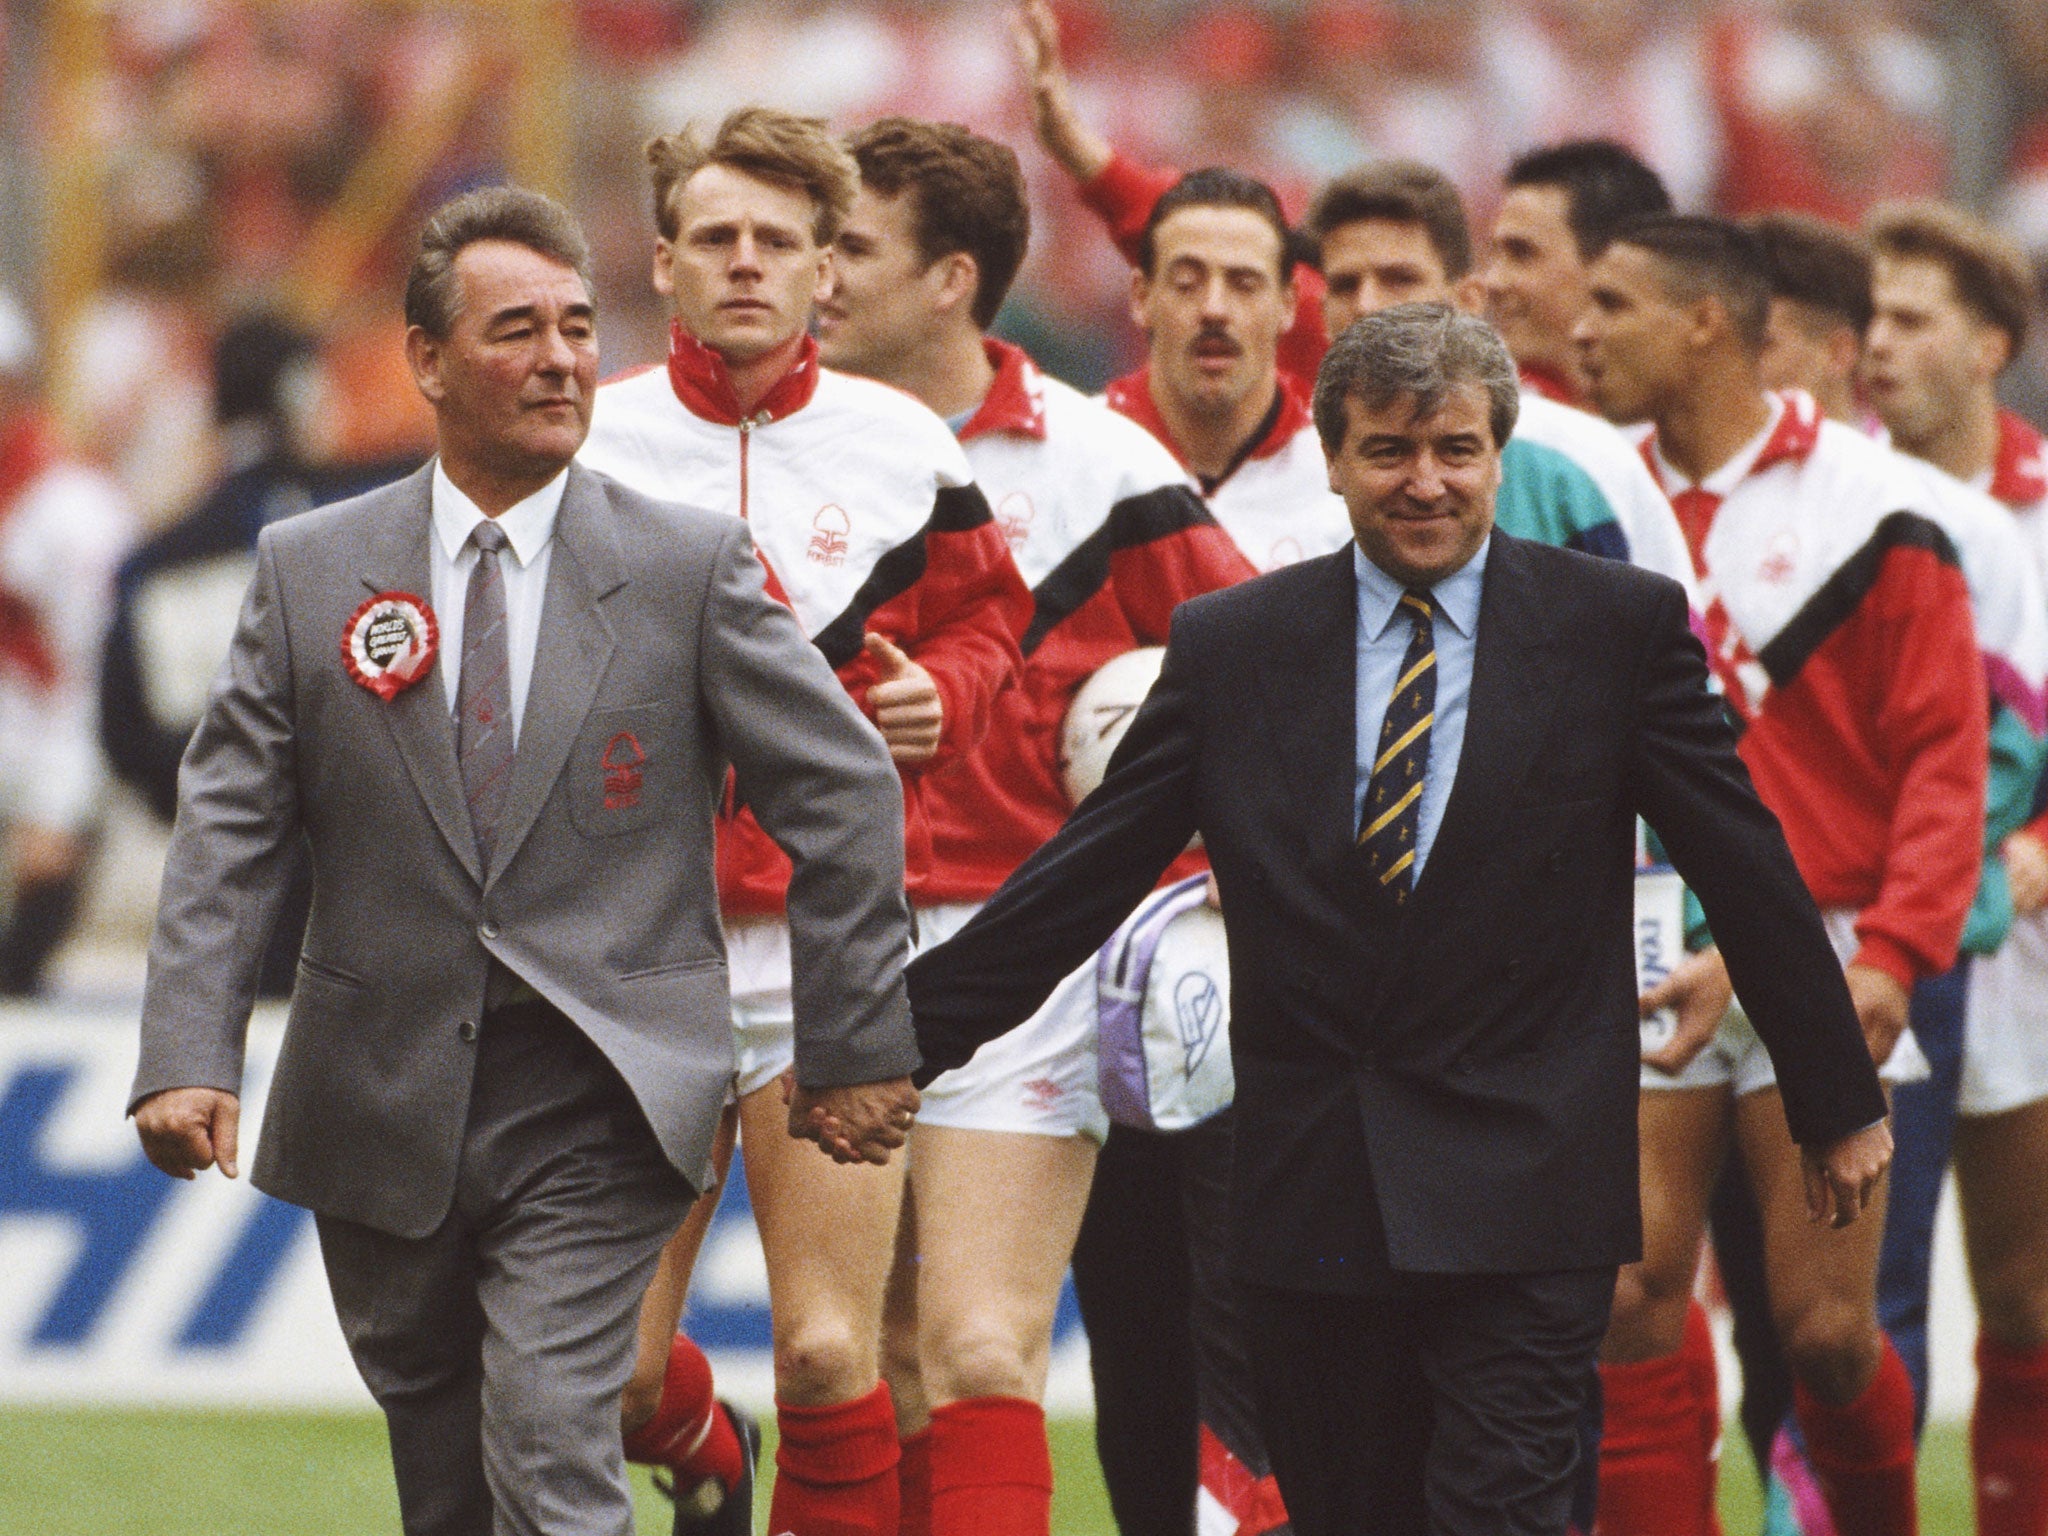 Brian Clough and Terry Venables hold hands as they walk on the Wembley pitch before Nottingham Forest played Tottenham in the 1991 FA Cup final